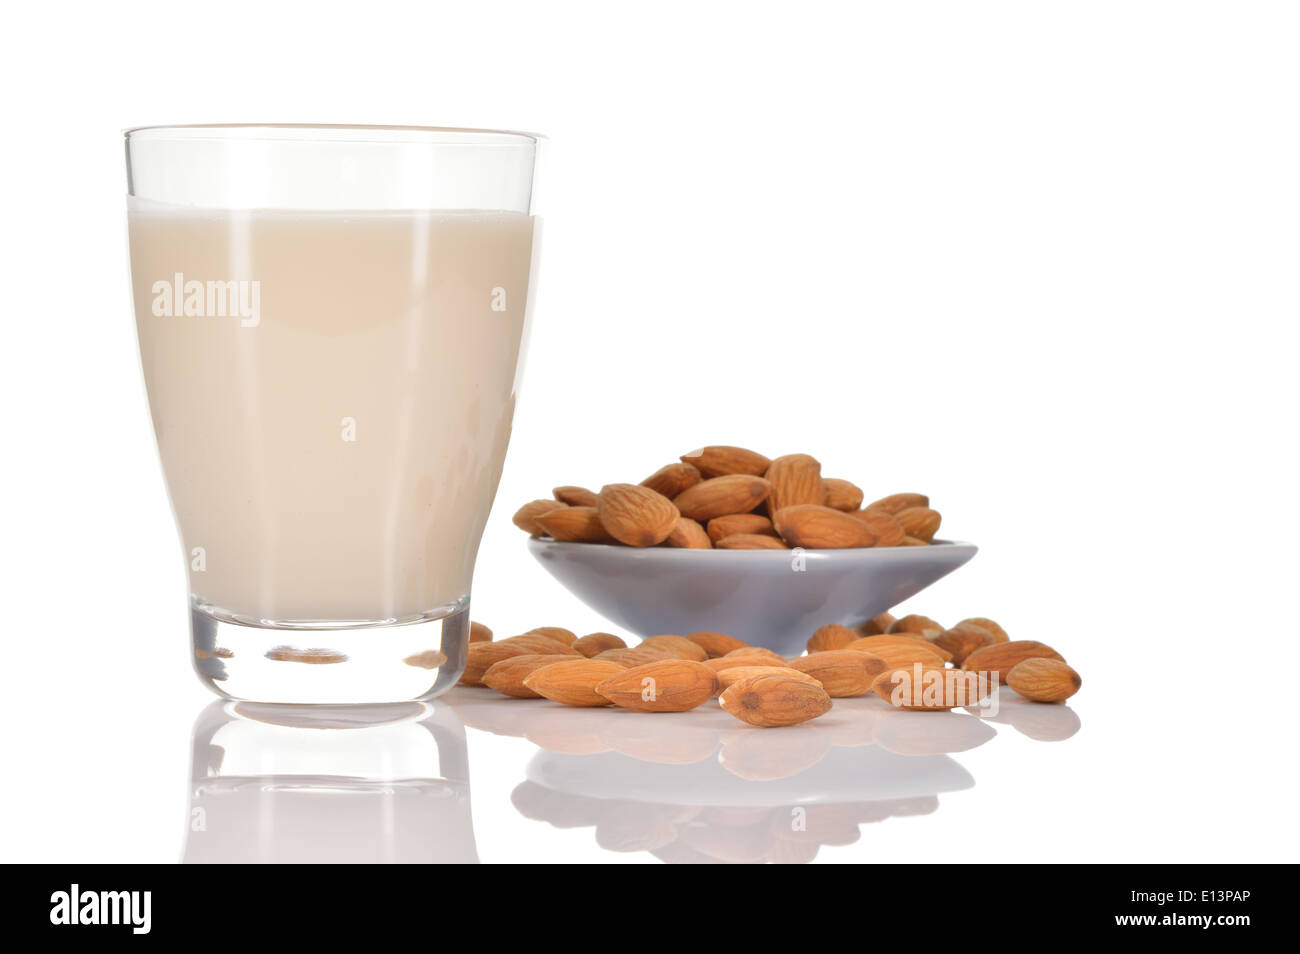 Almond milk as a substitute for dairy milk. Glass of almond milk and few almonds on a saucer isolated on white background. Stock Photo